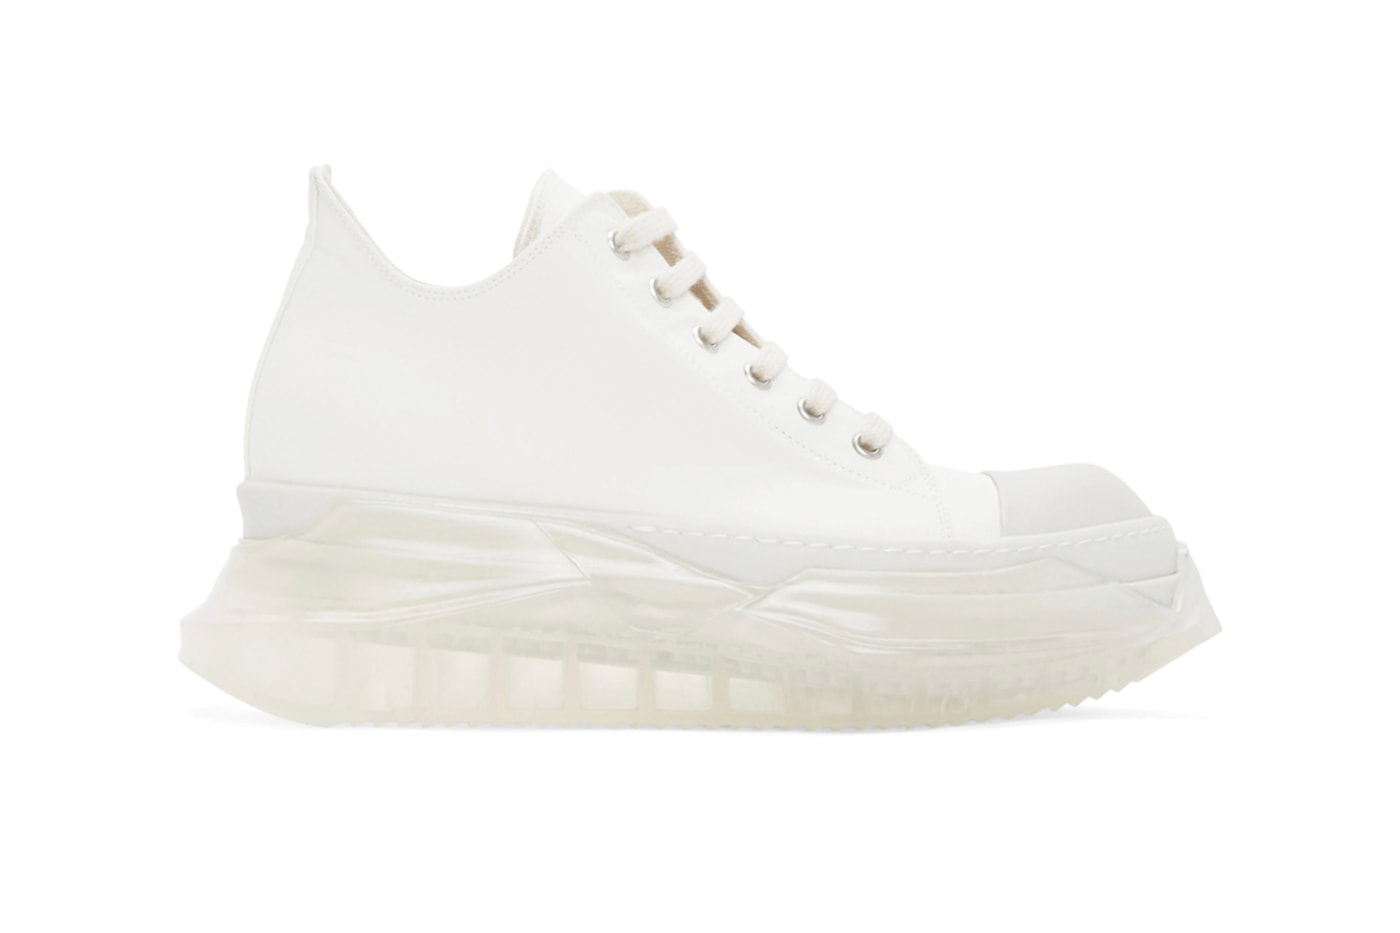 Rick Owens DRKSHDW Abstract Sneakers Release Black White Info Buy Price SSENSE